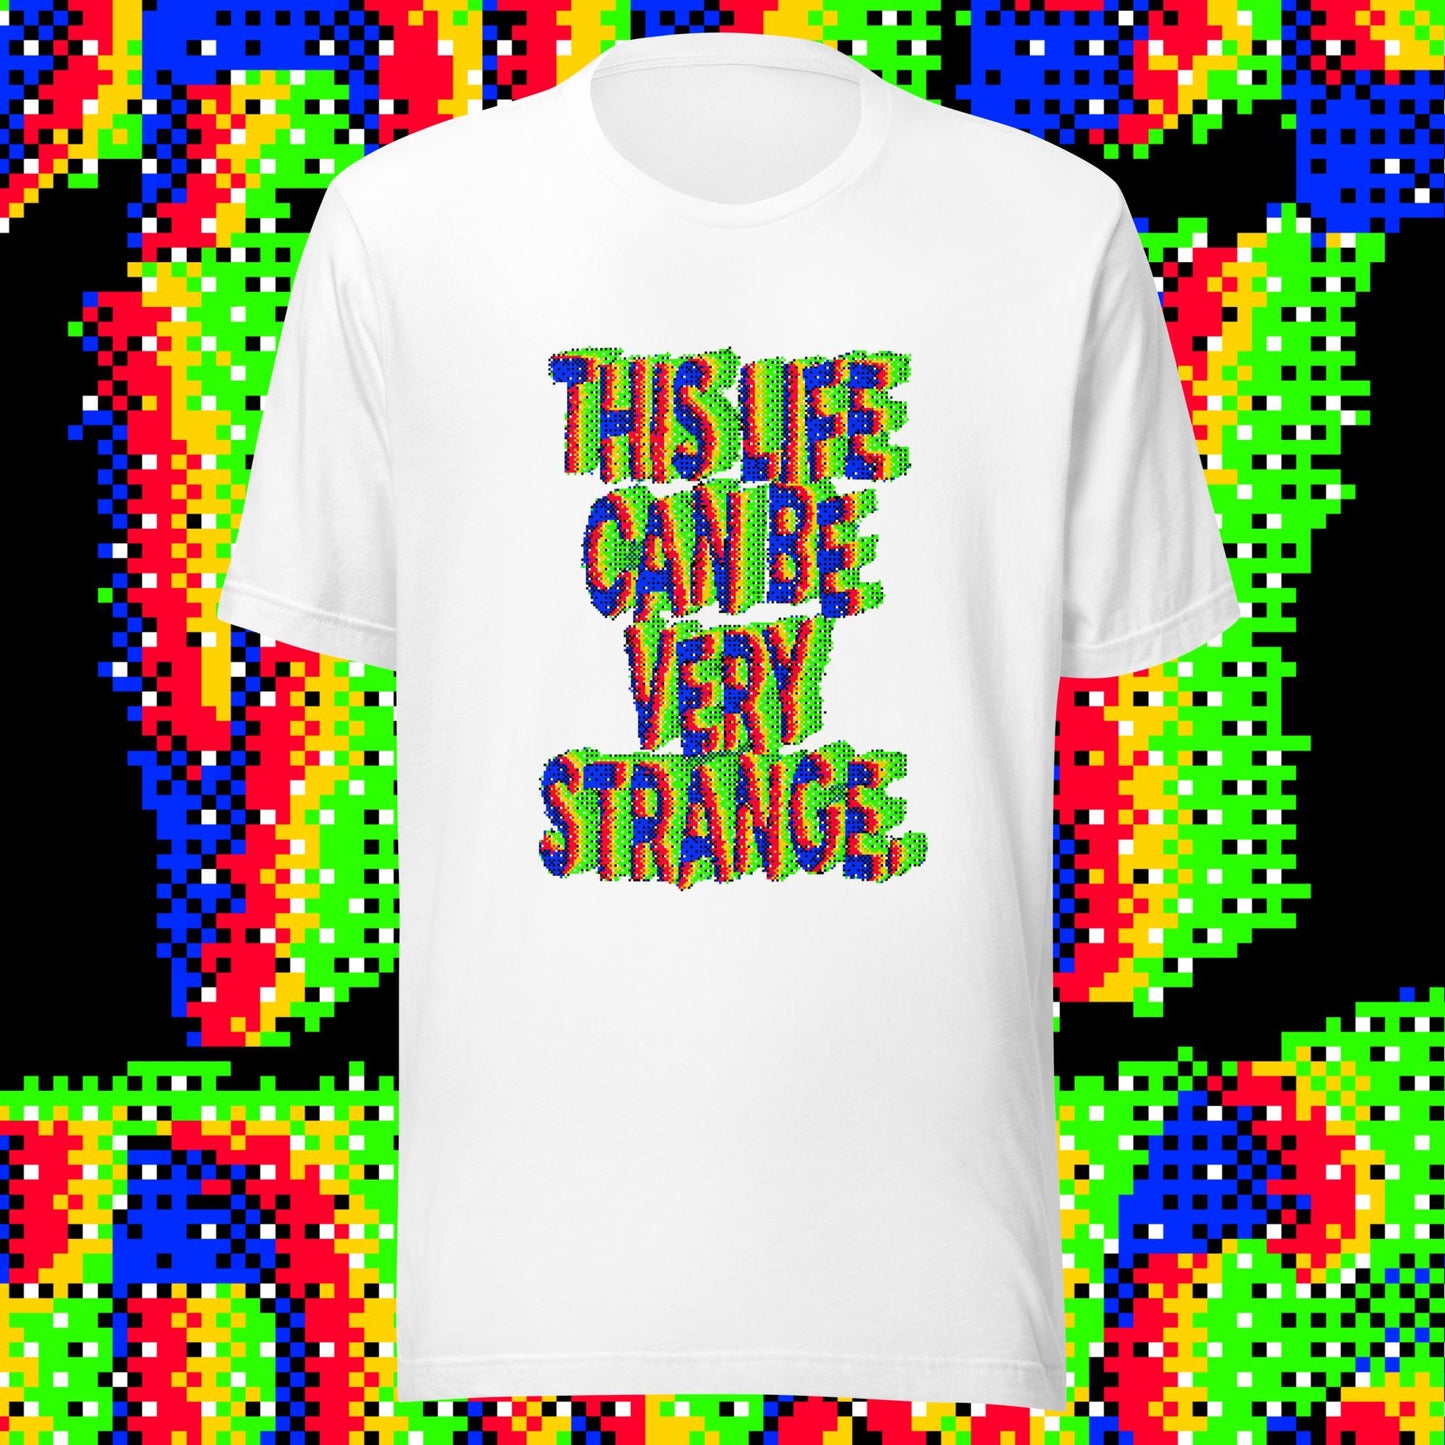 This Life Can Be Very Strange Tee